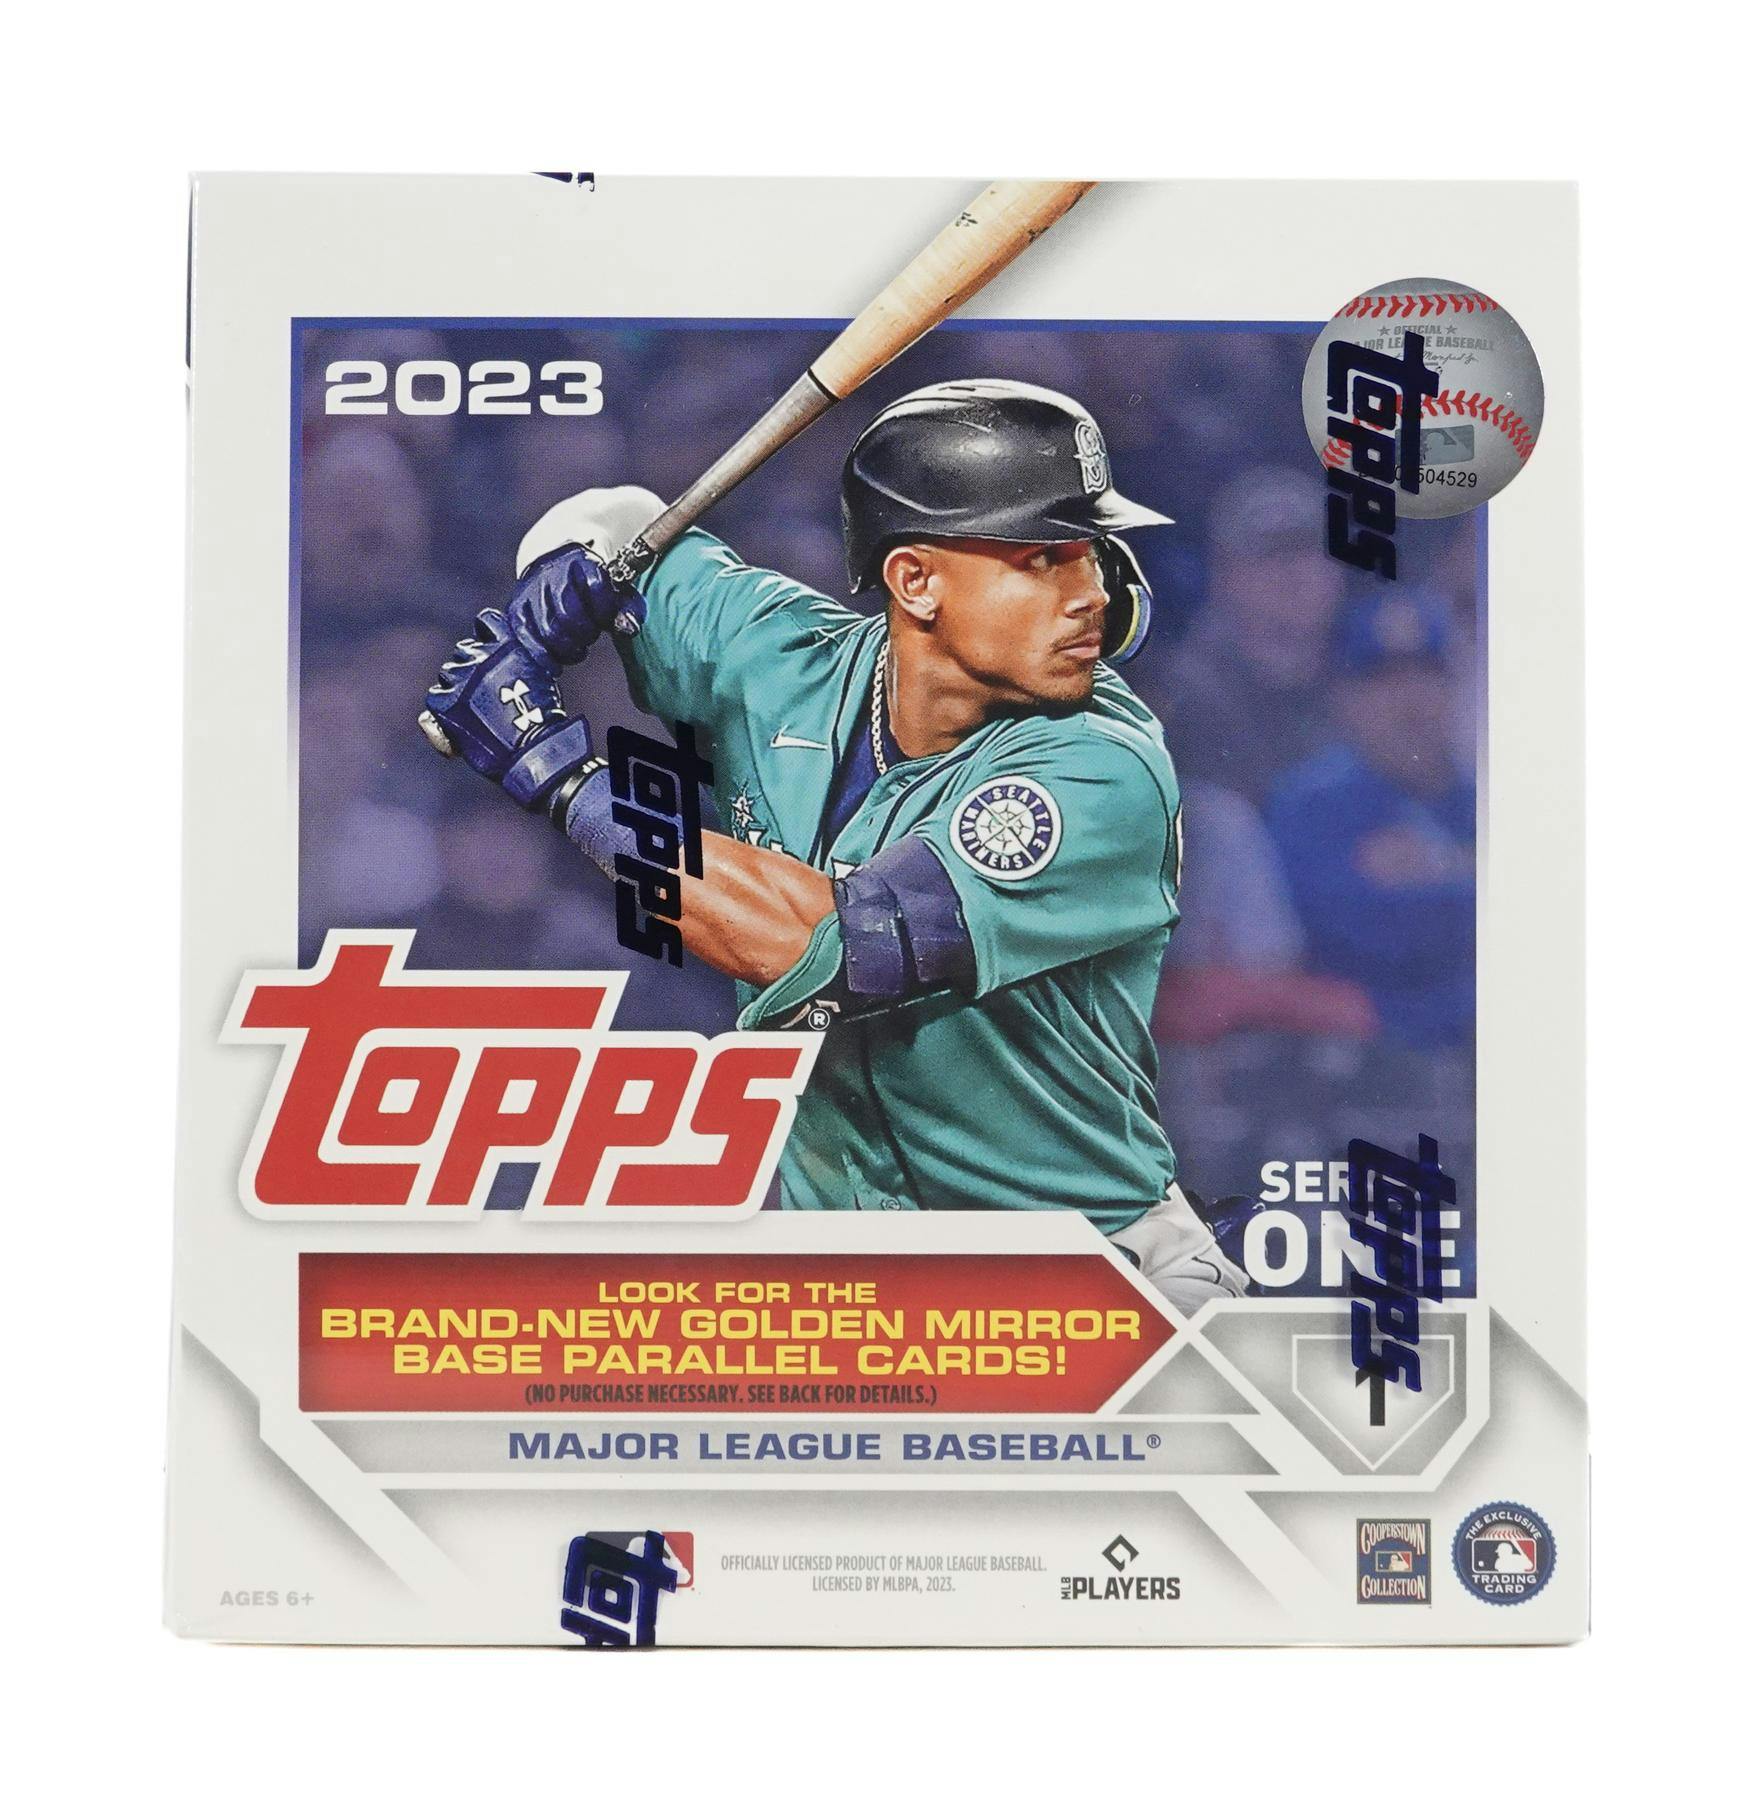 MLB rookies 2023: Which rookies will appear in 2023 baseball card